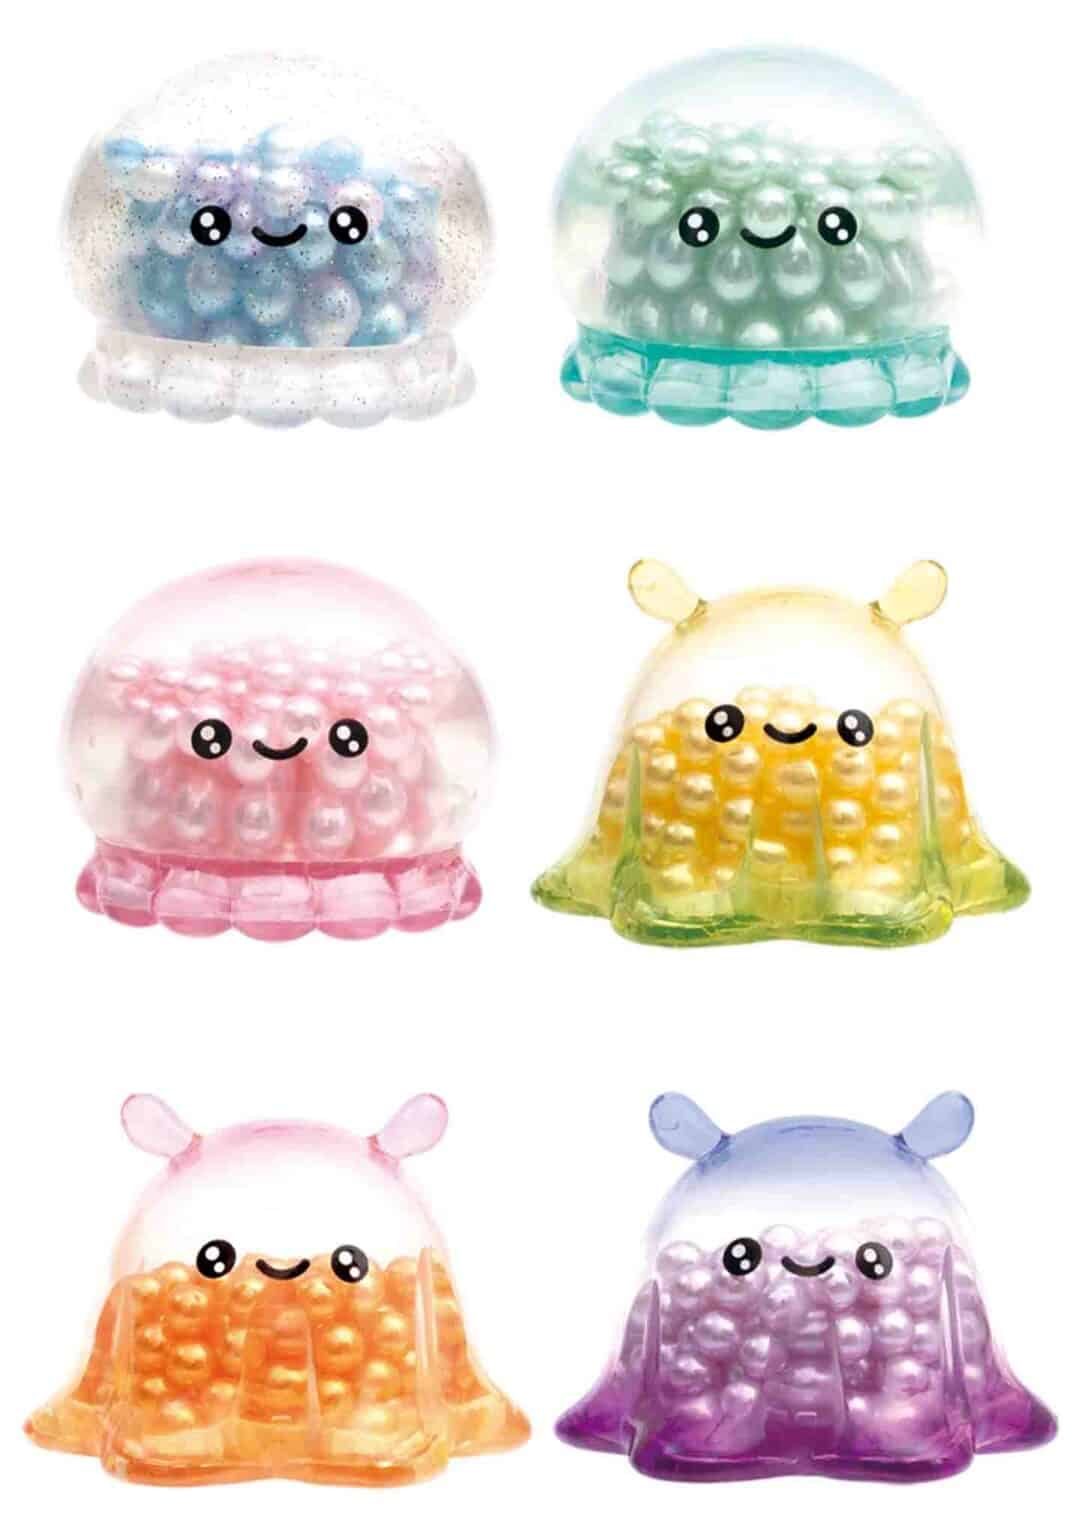 Clever Idiots Qualia: Pearl Shaker Jellyfish & Flapjack Octopus 1.5" Figure Surprise Box Kawaii Gifts 4589795377130